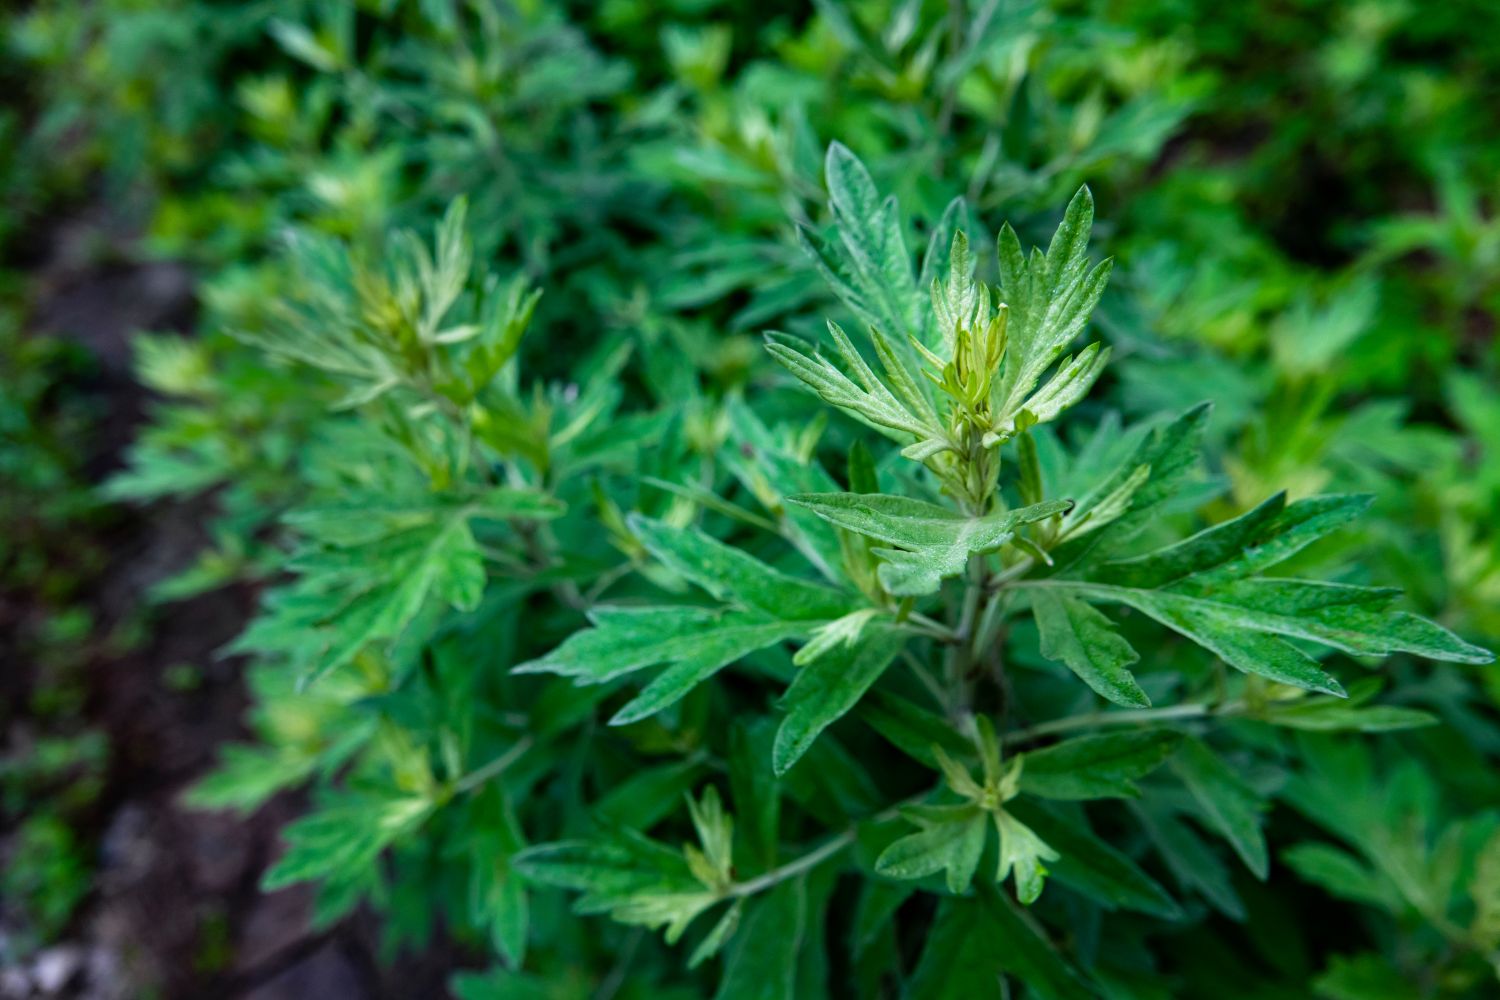 Bright green leaves of wormwood